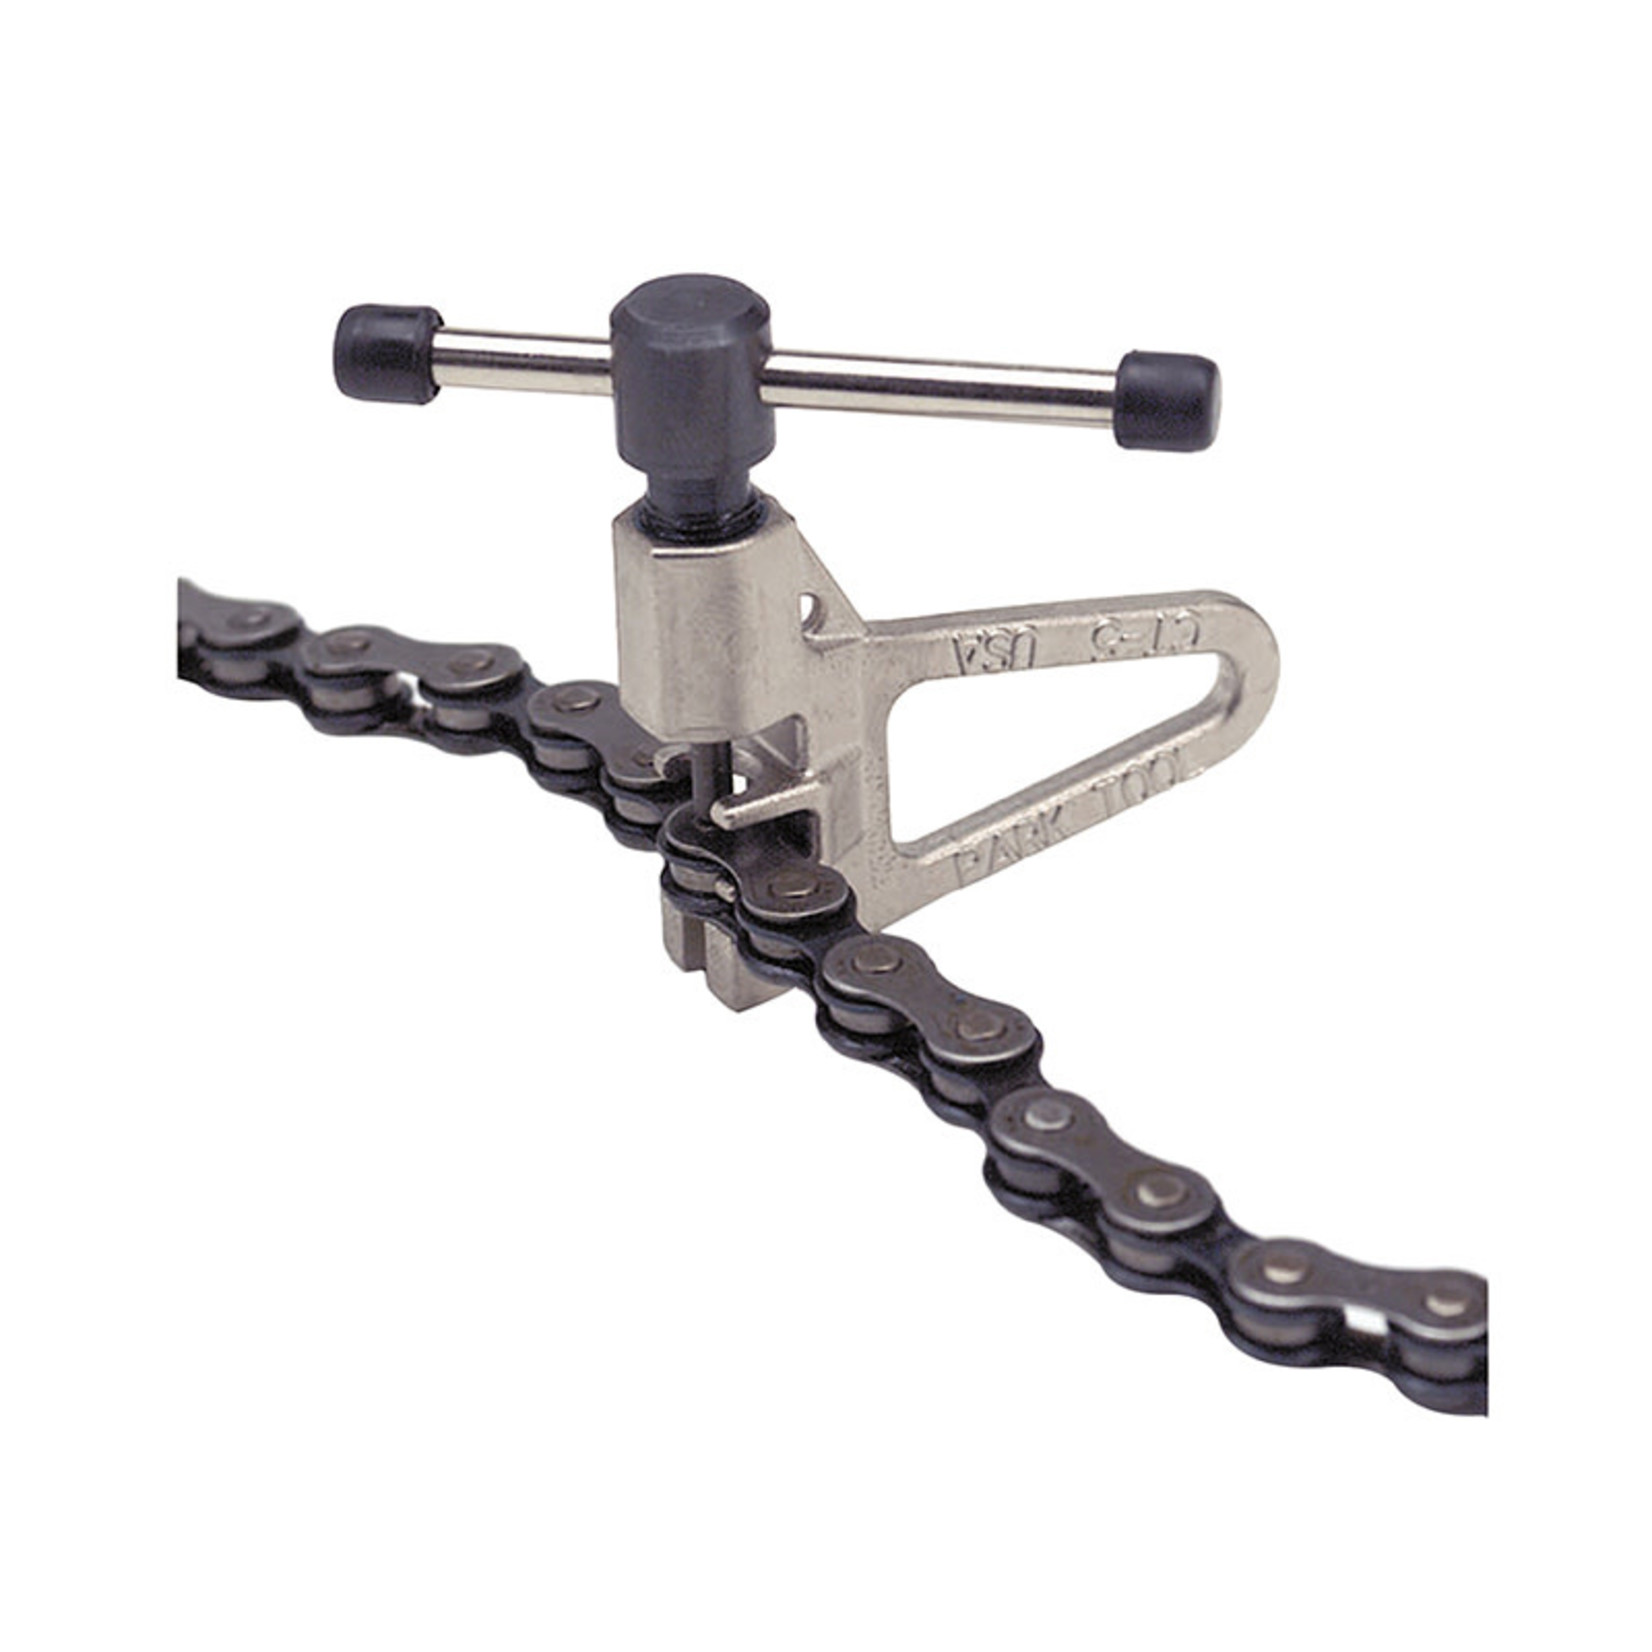 PARK TOOL TOOL CHAIN BREAKER PARK CT-5 COMPACT